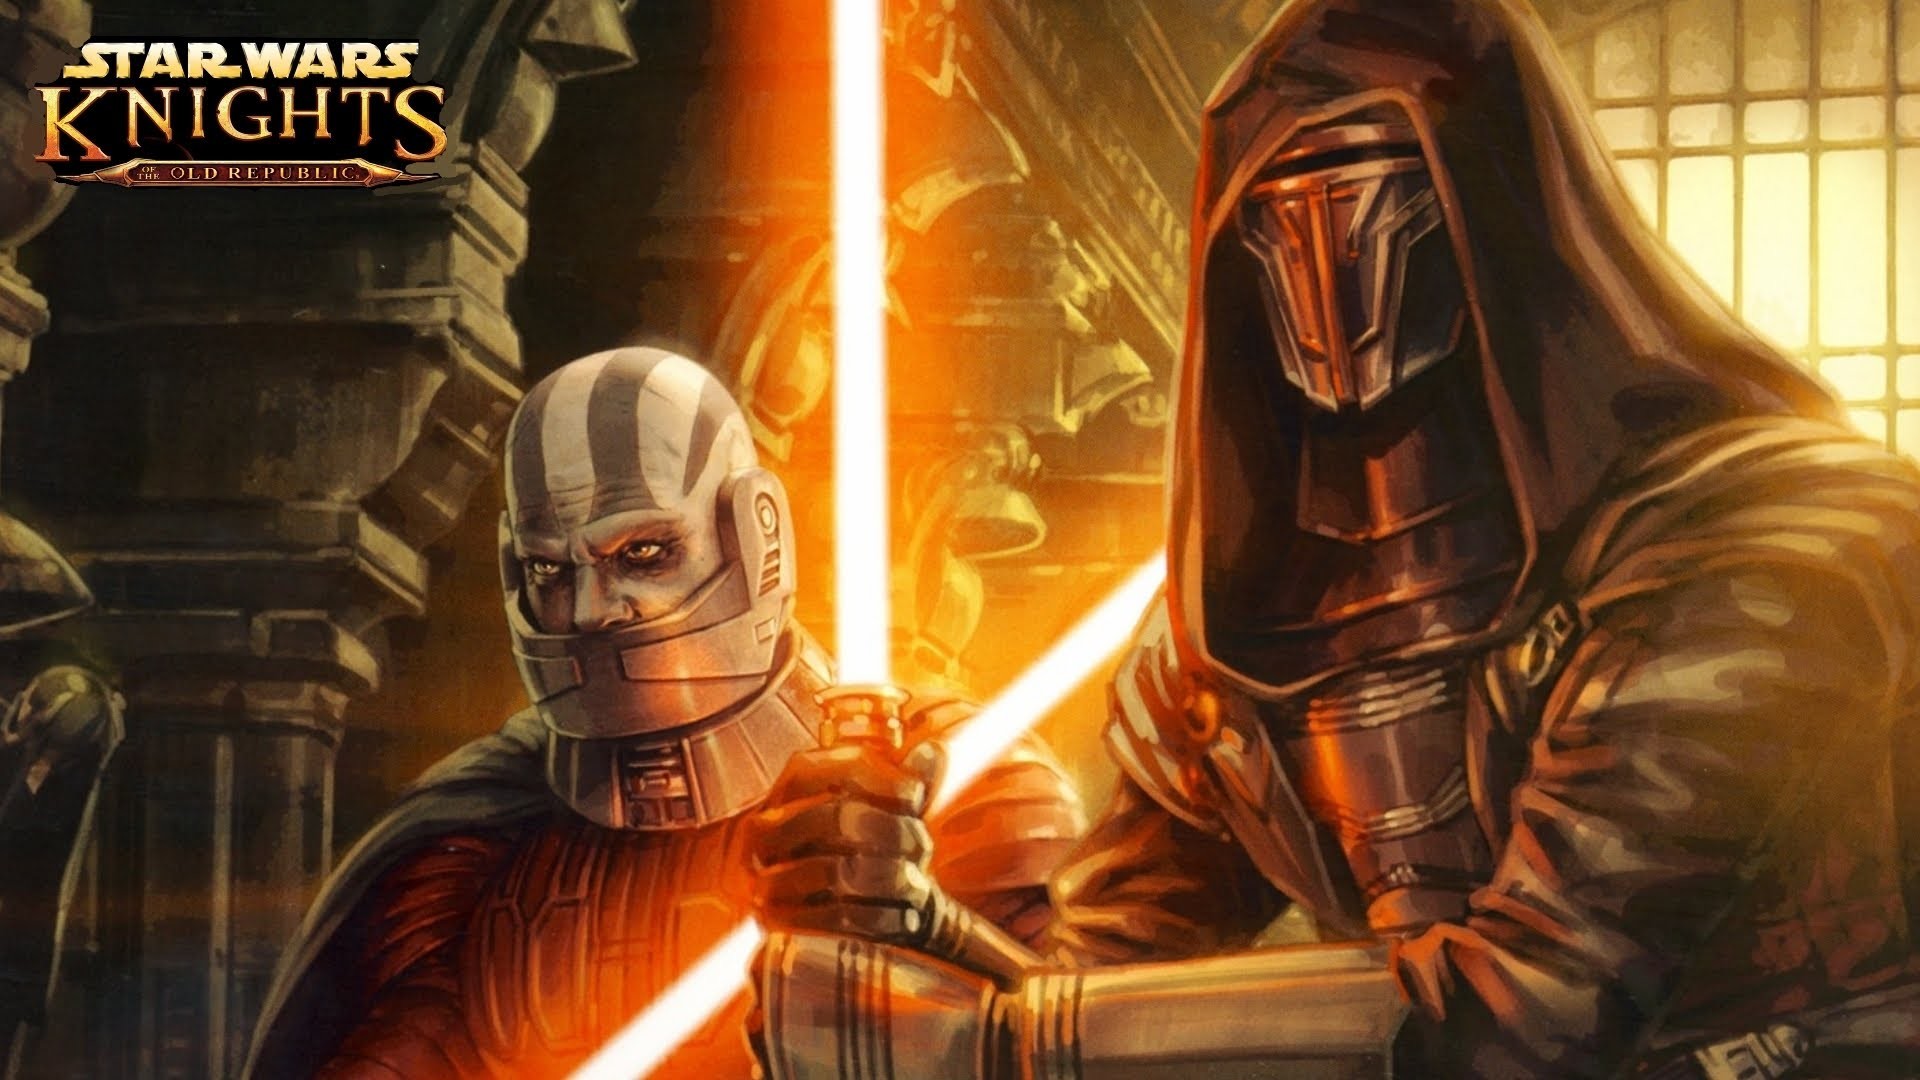 1920x1080 A New Star Wars: Knights of the Old Republic Game Could Be in the Works